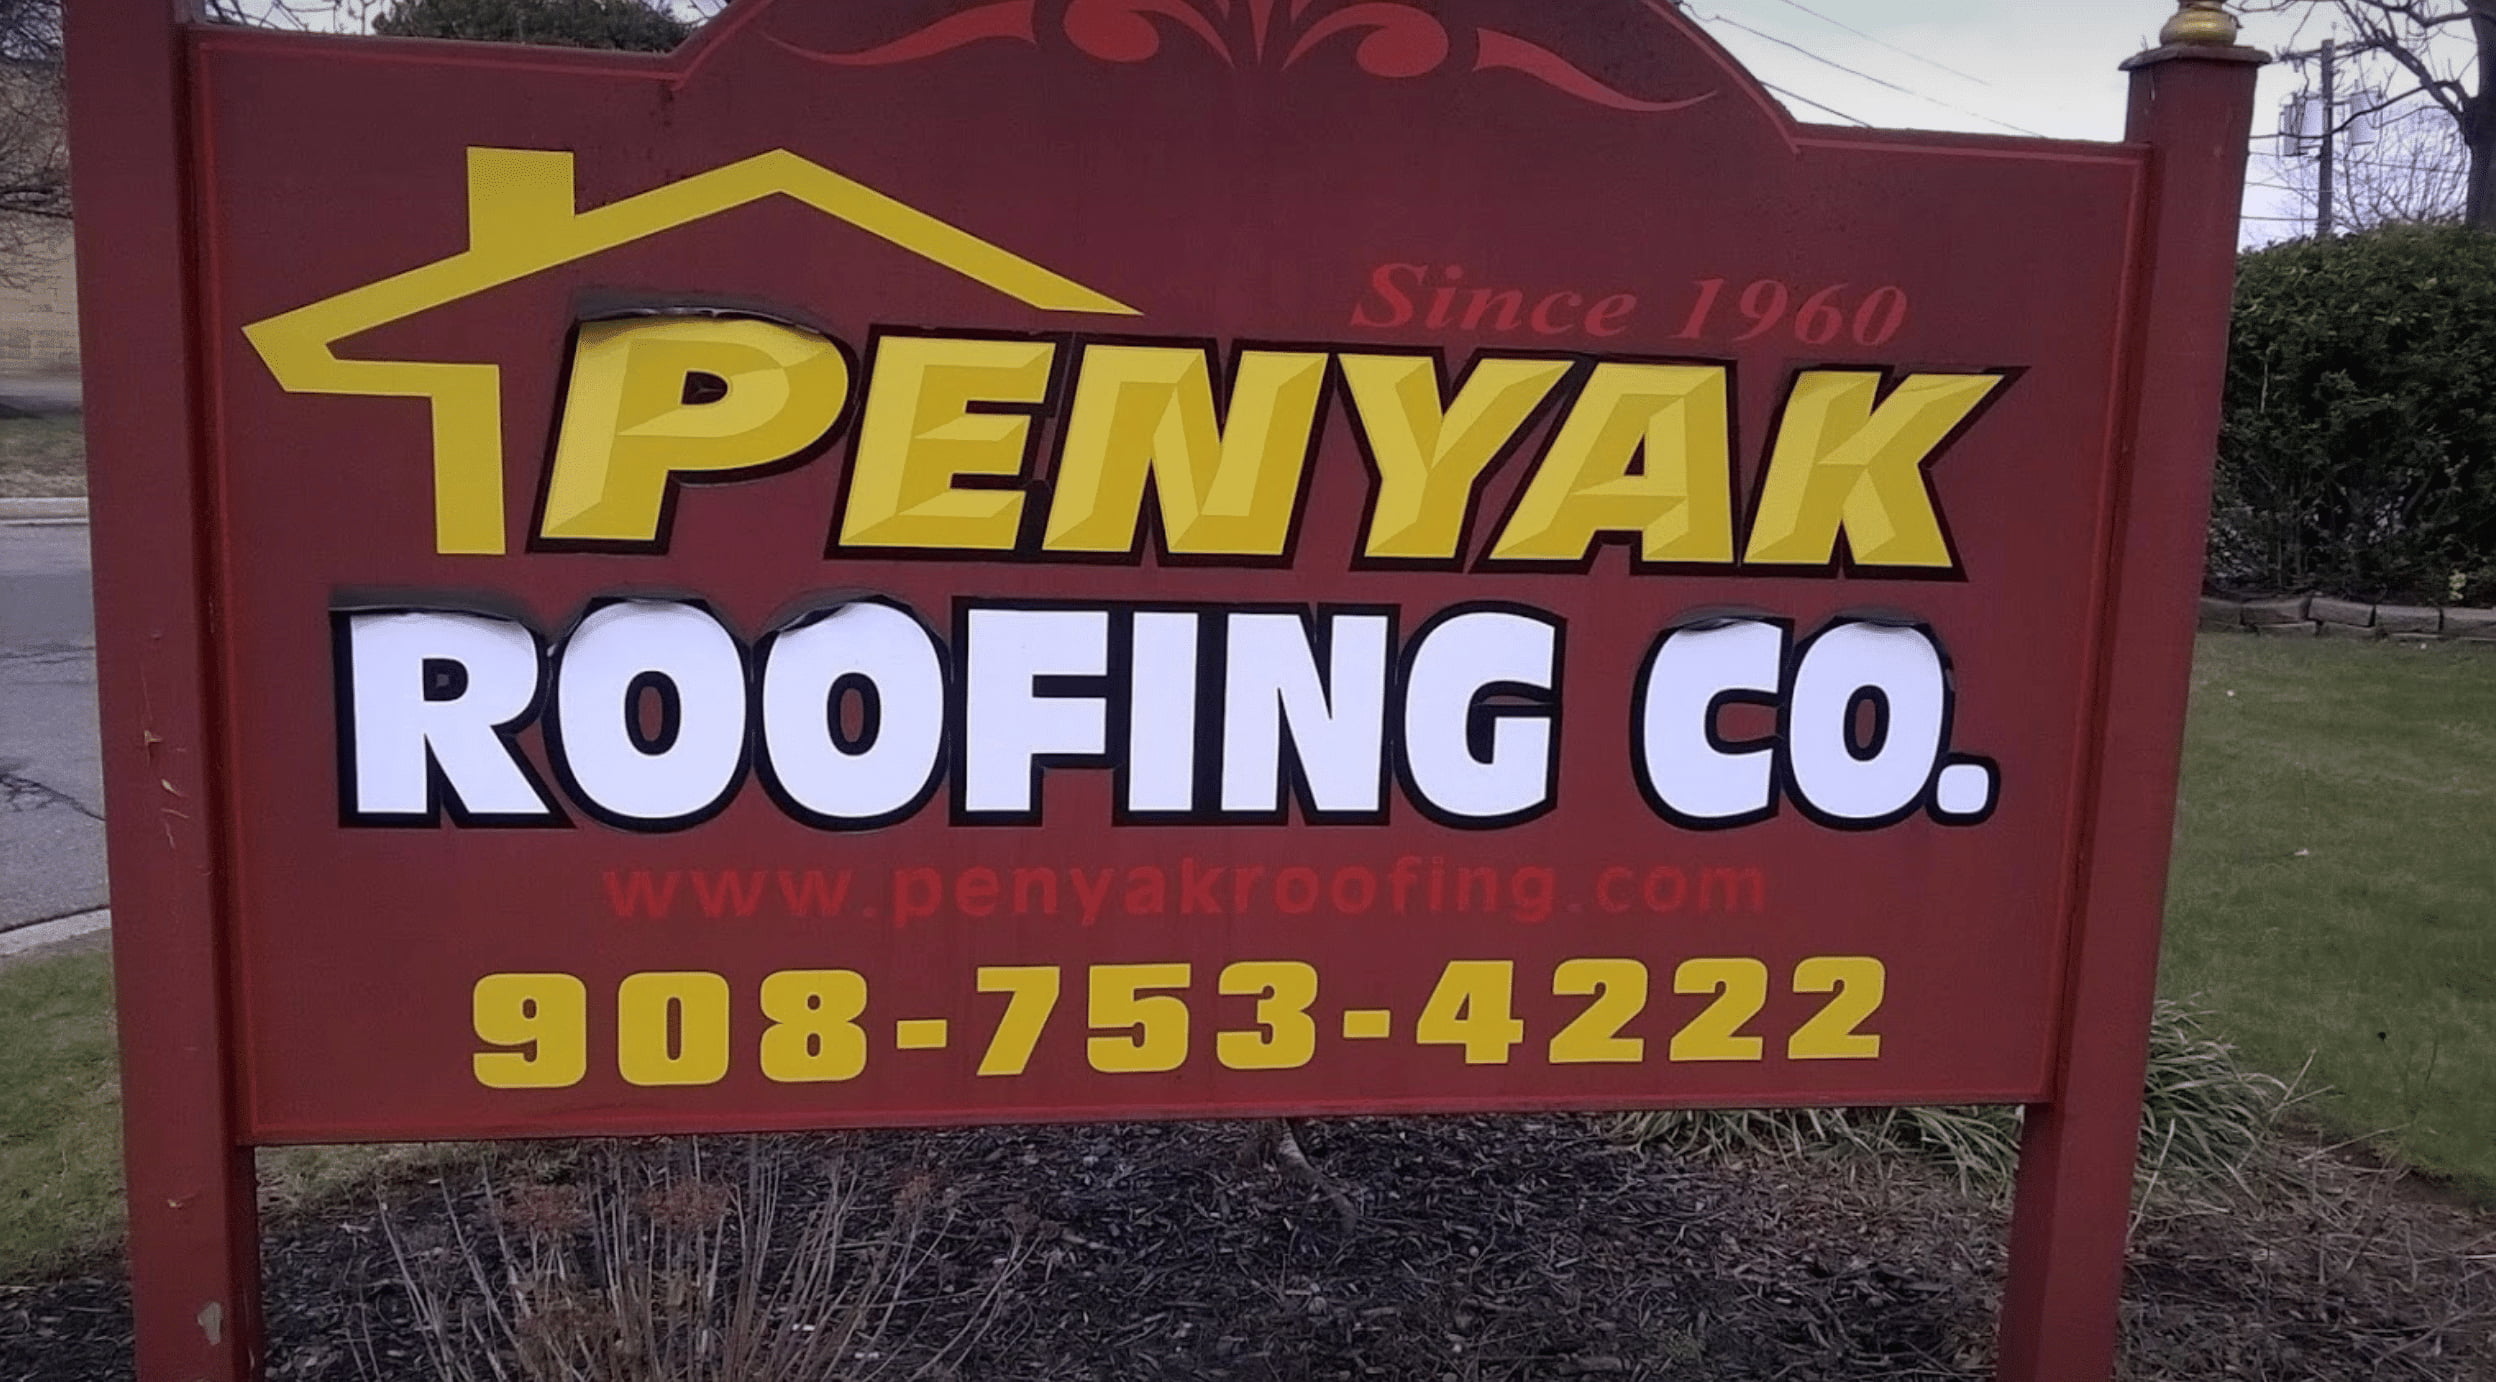 Penyak Roofing roofing company in New Jersey